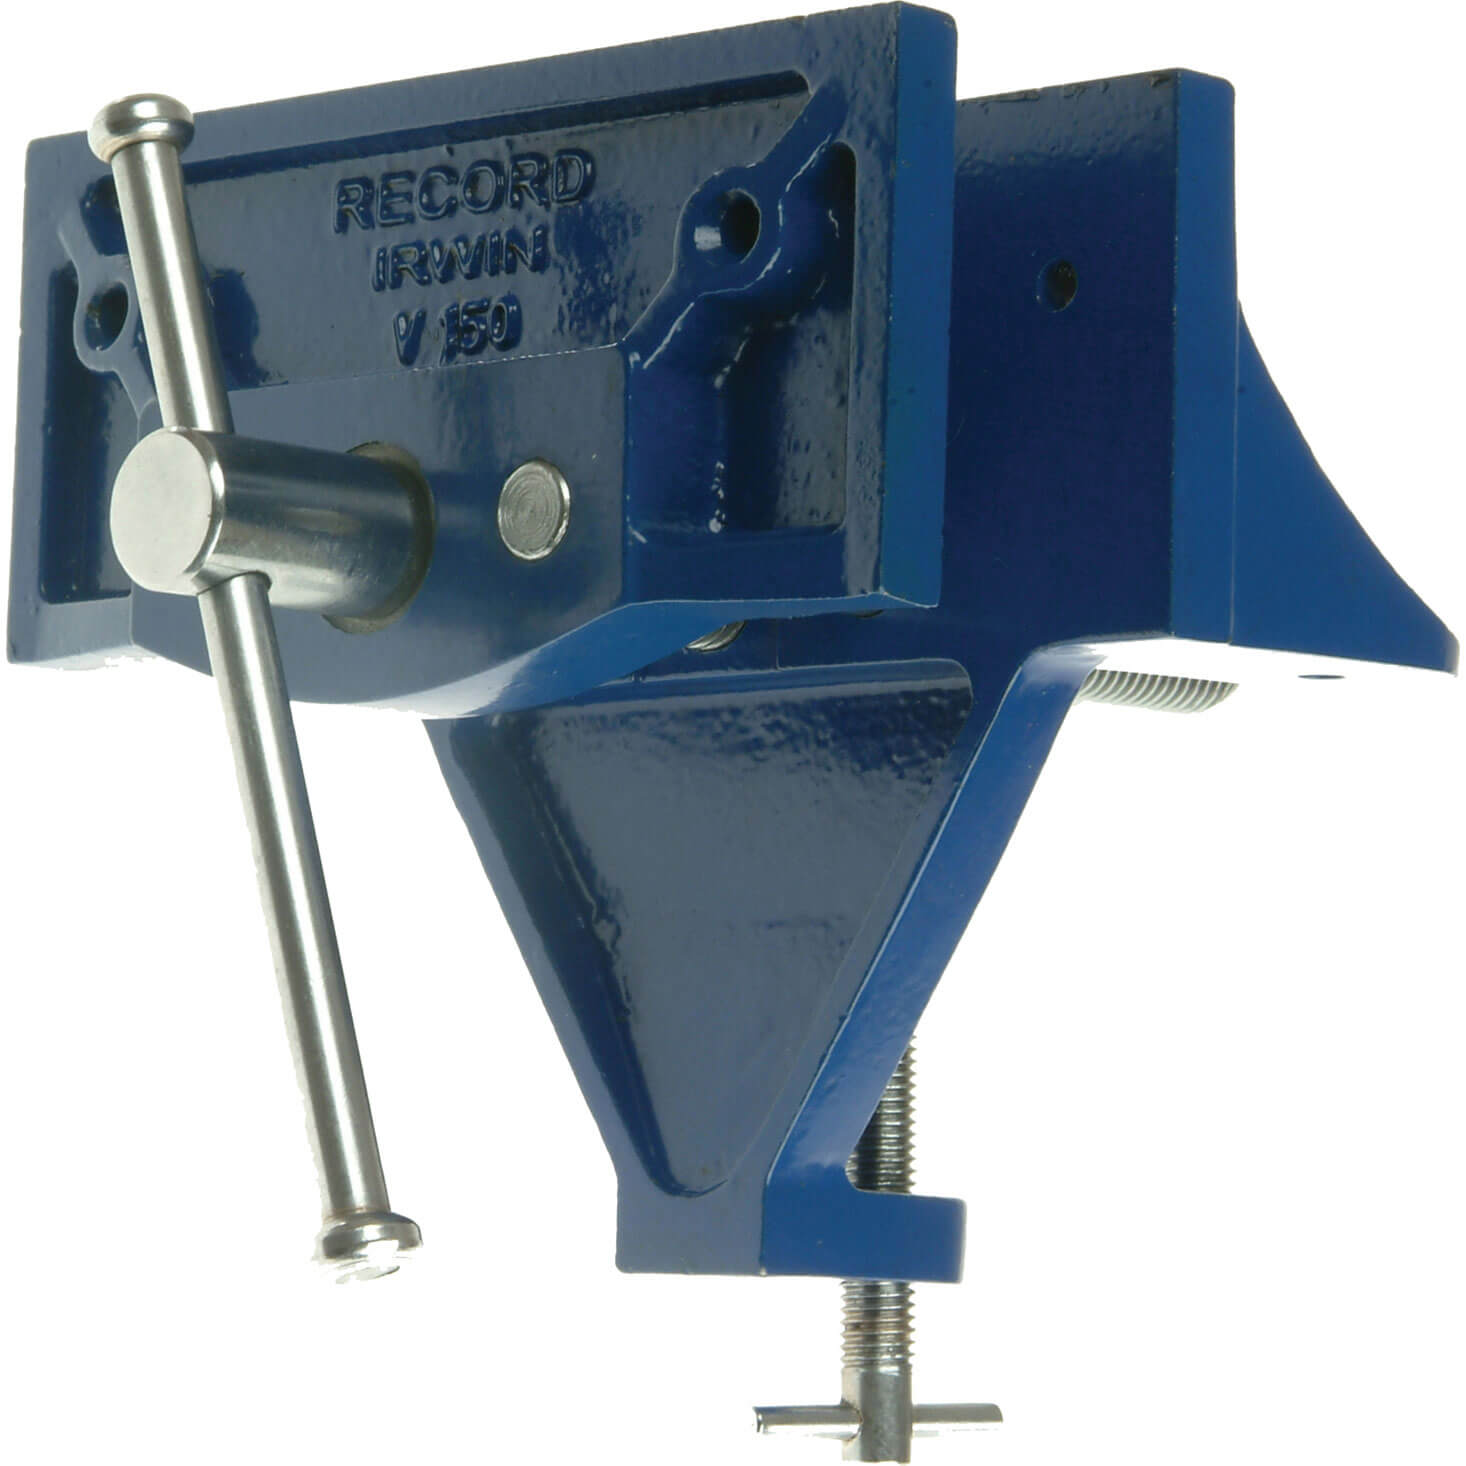 Photo of Irwin Record V150b Clamp Mount Woodcraft Vice 150mm